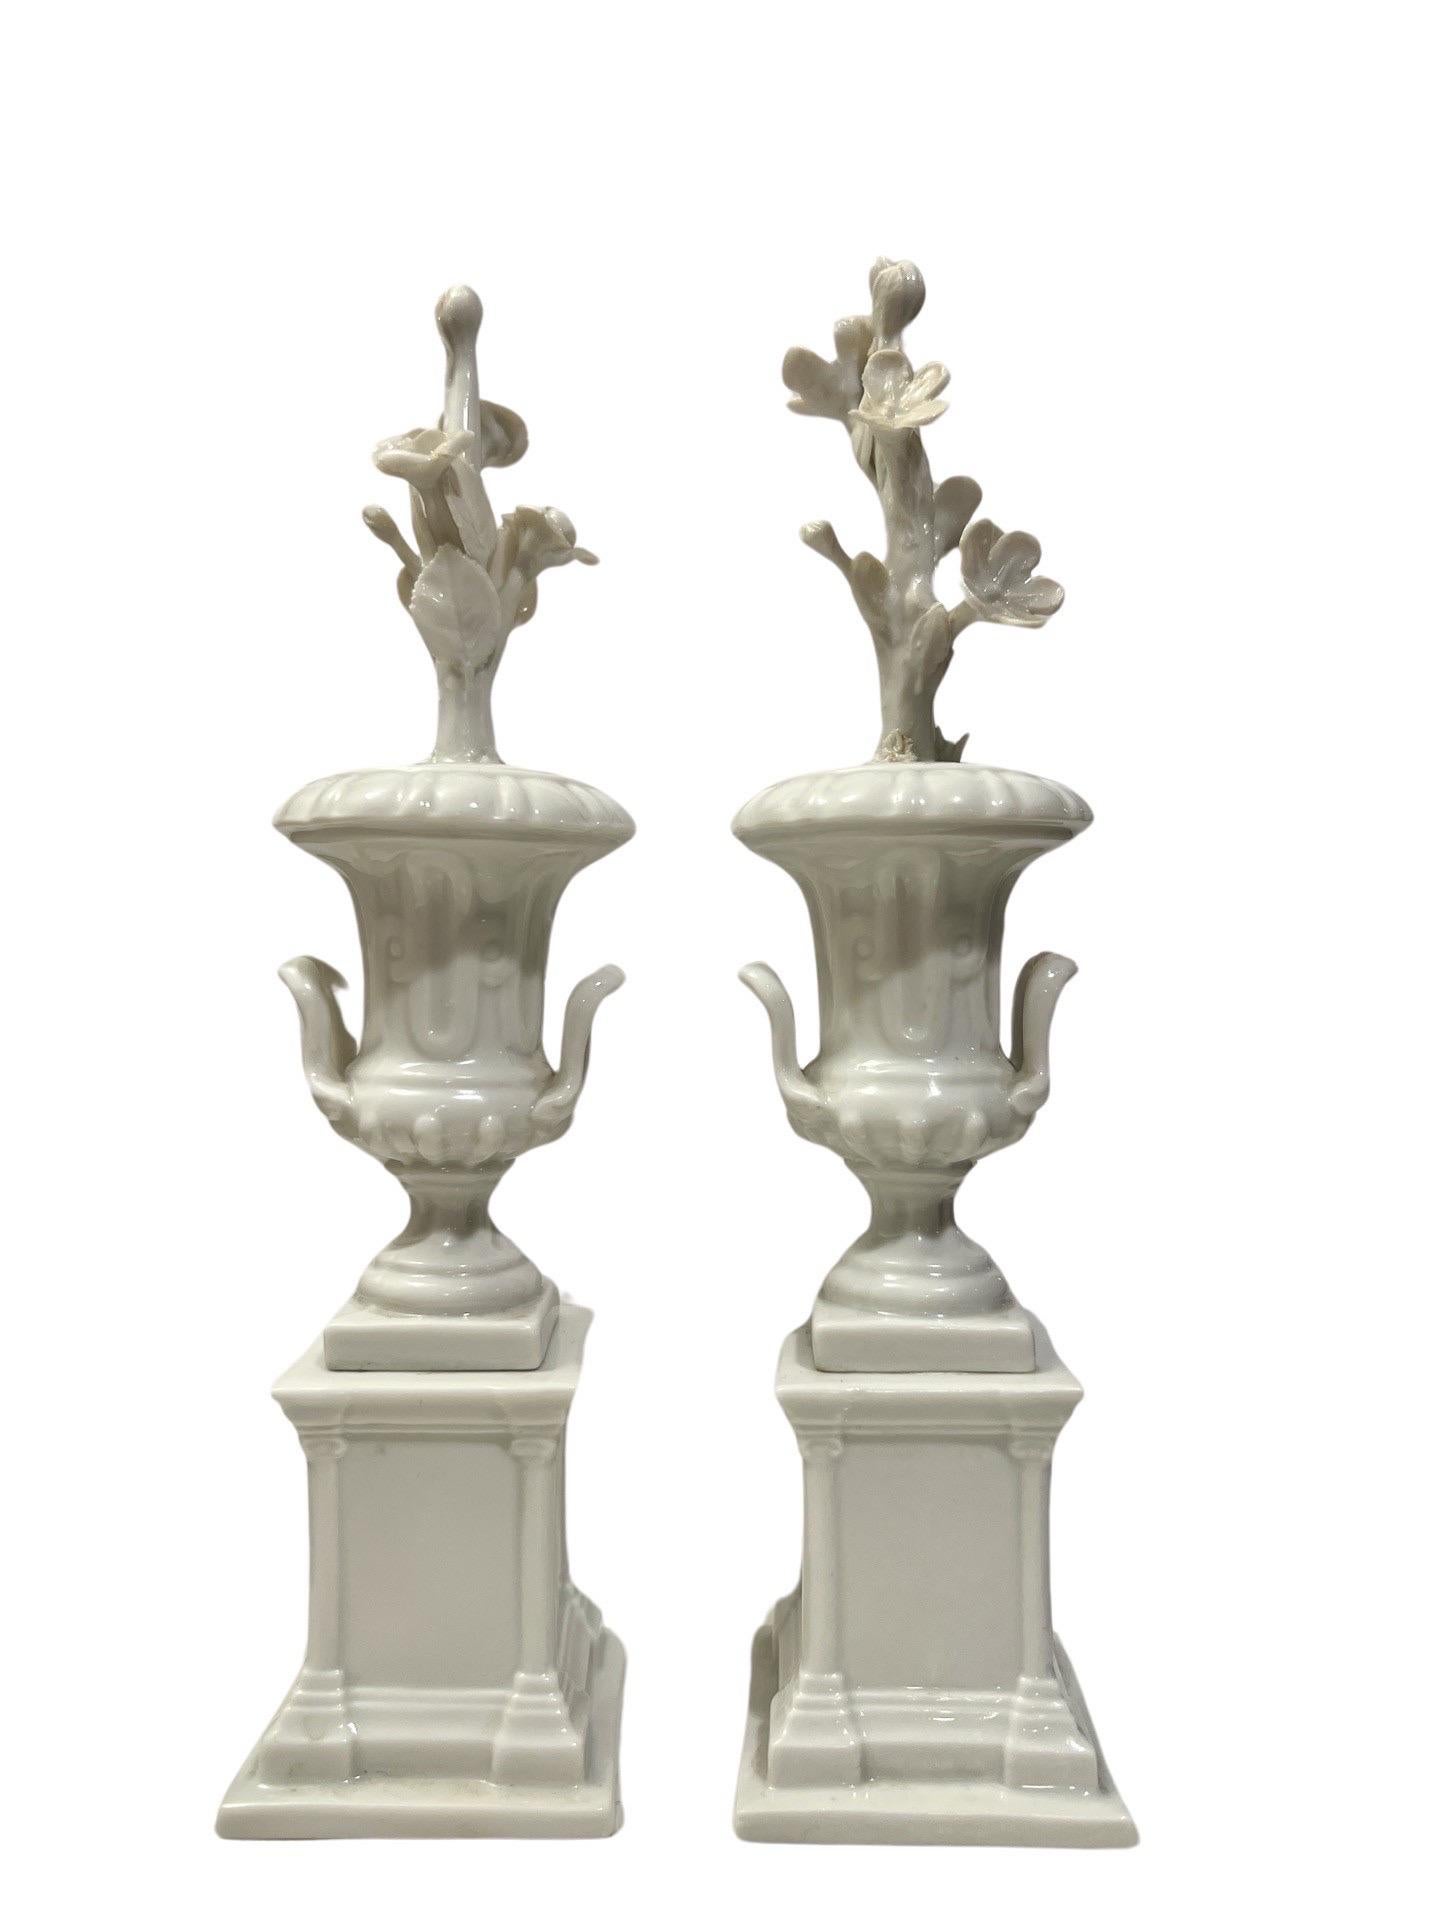 Italian, 20th century. 

A pair of petite blanc de chine porcelain urns with floral stem motif extending from each. Marked to underside with the Capodimonte blue mark.